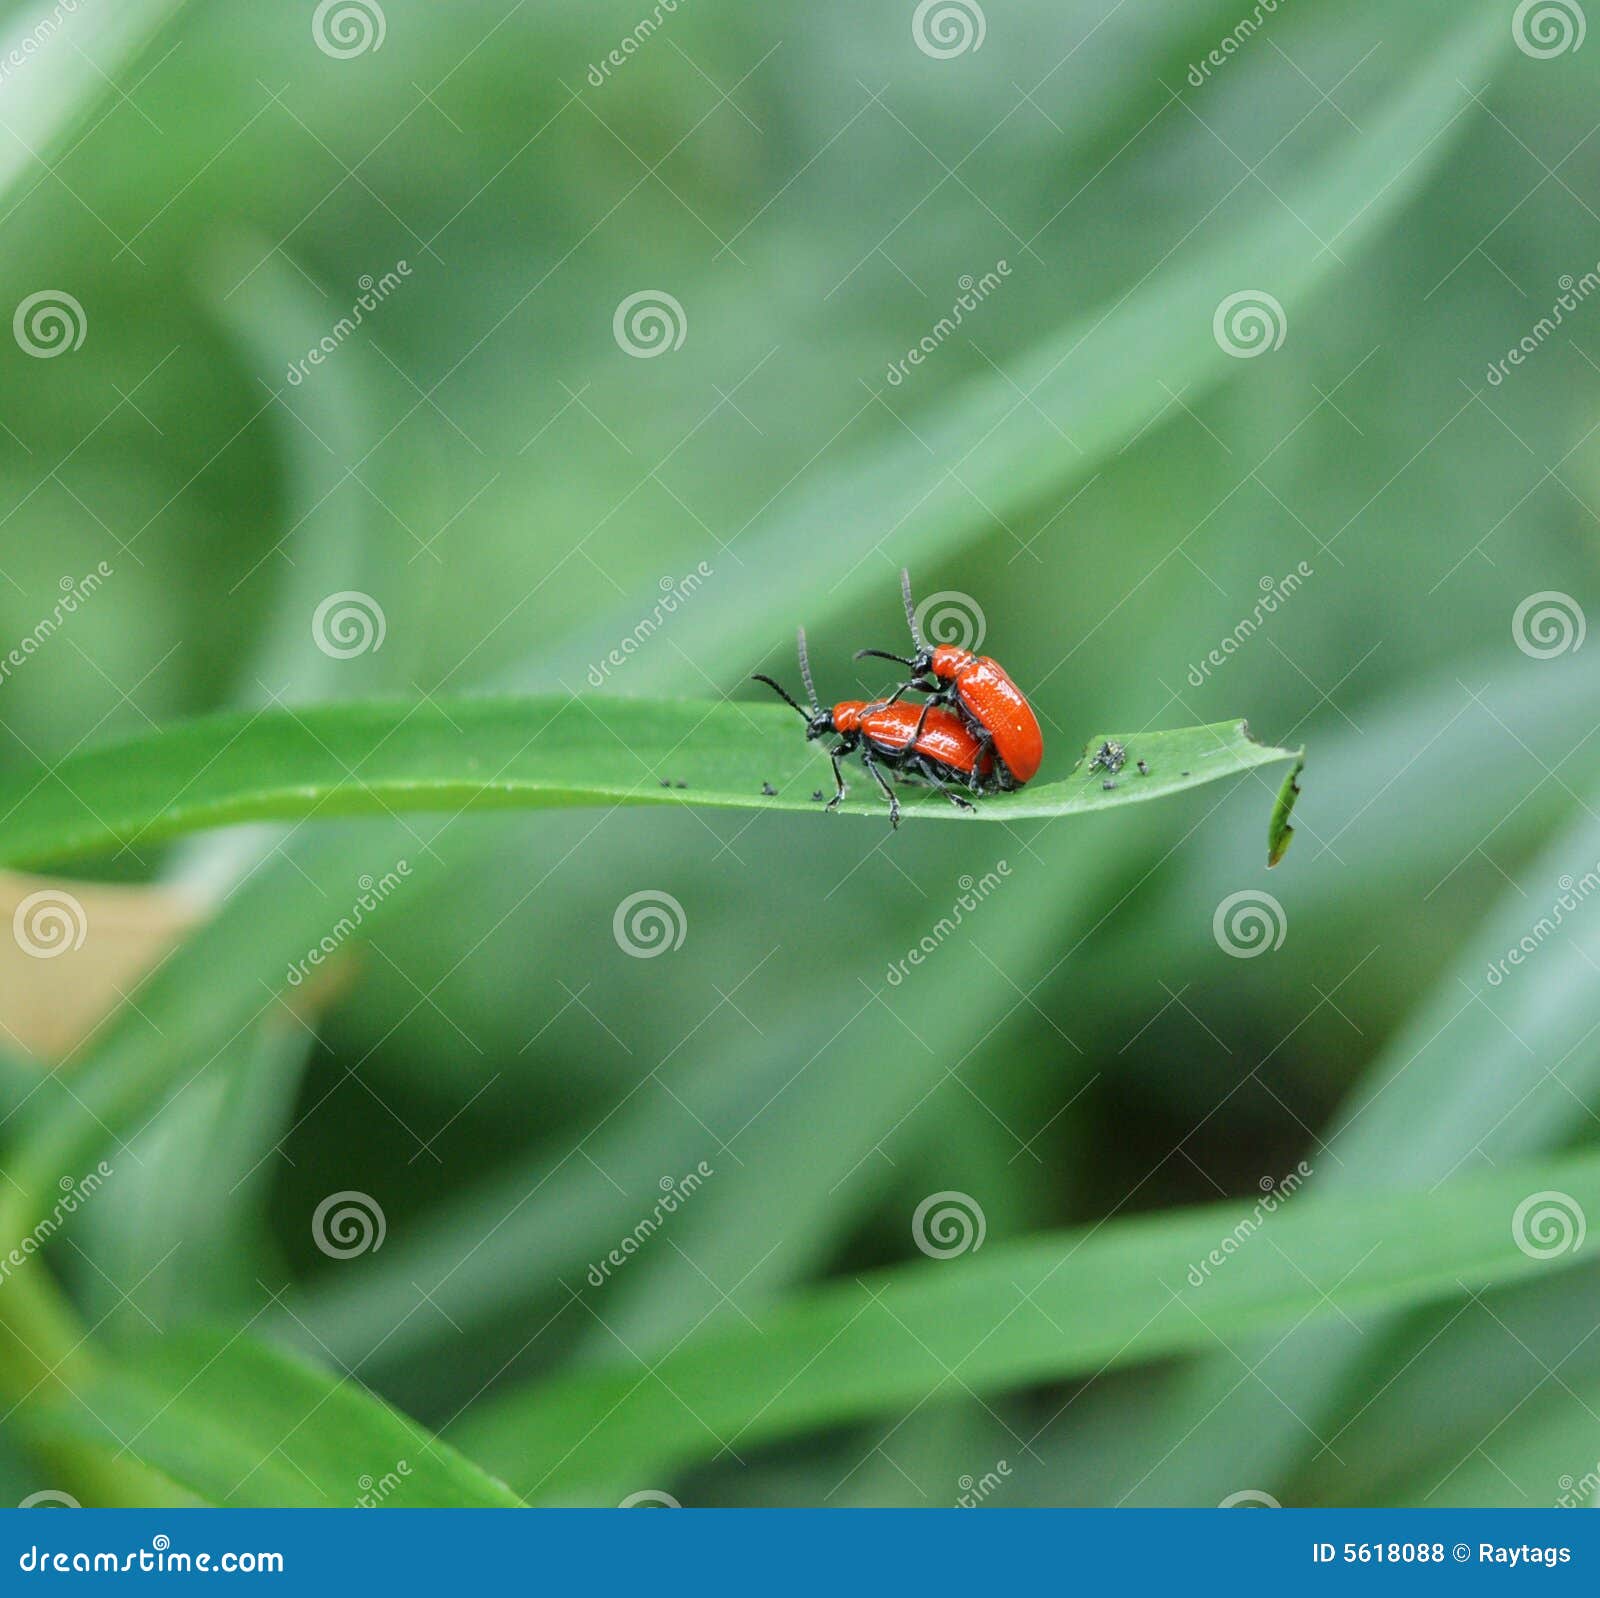  Insect Reproduction  stock photo Image of montreal love 